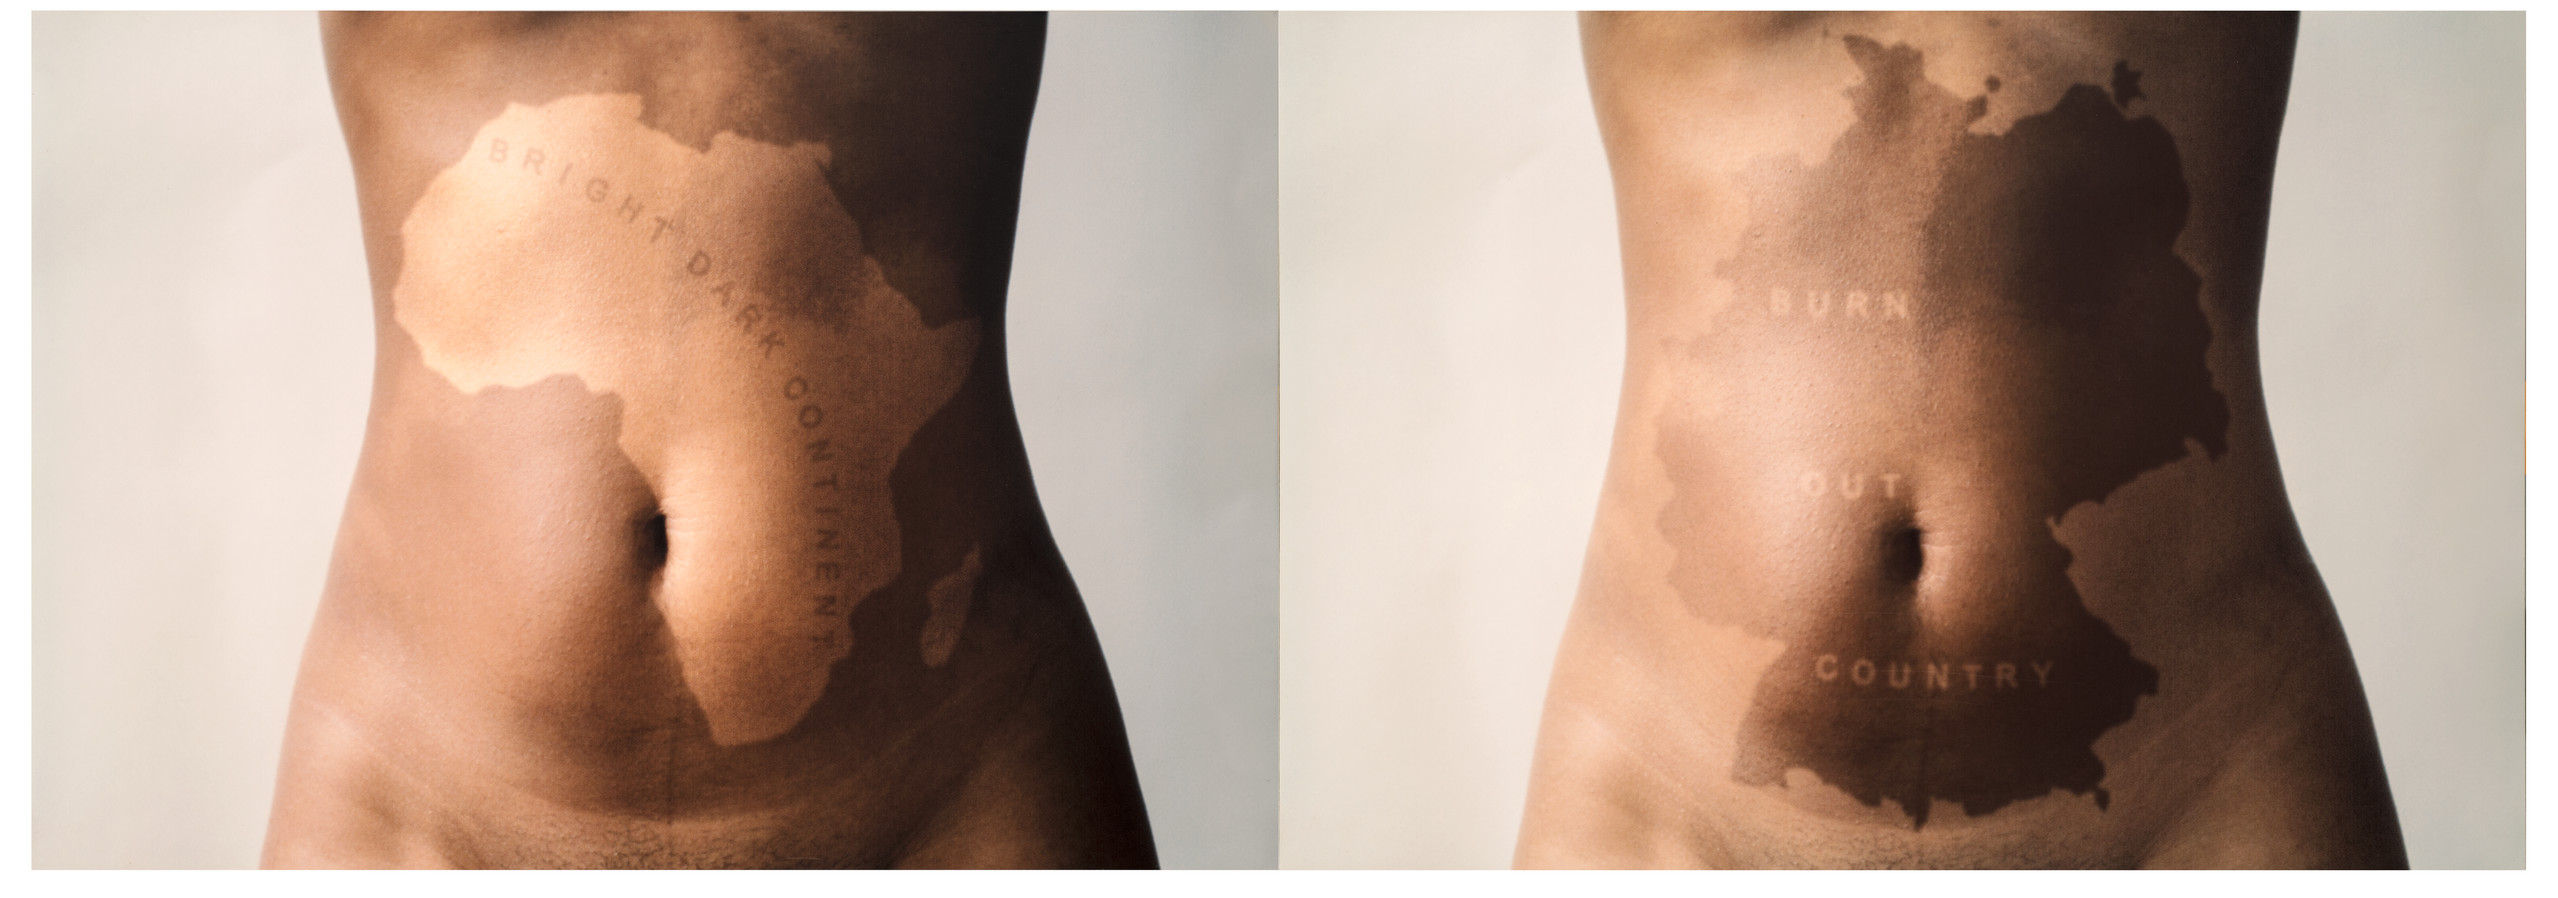 There is two nude torsos side by side. On the left, the torso has a lighter patch of skin that outlines Africa and reads 